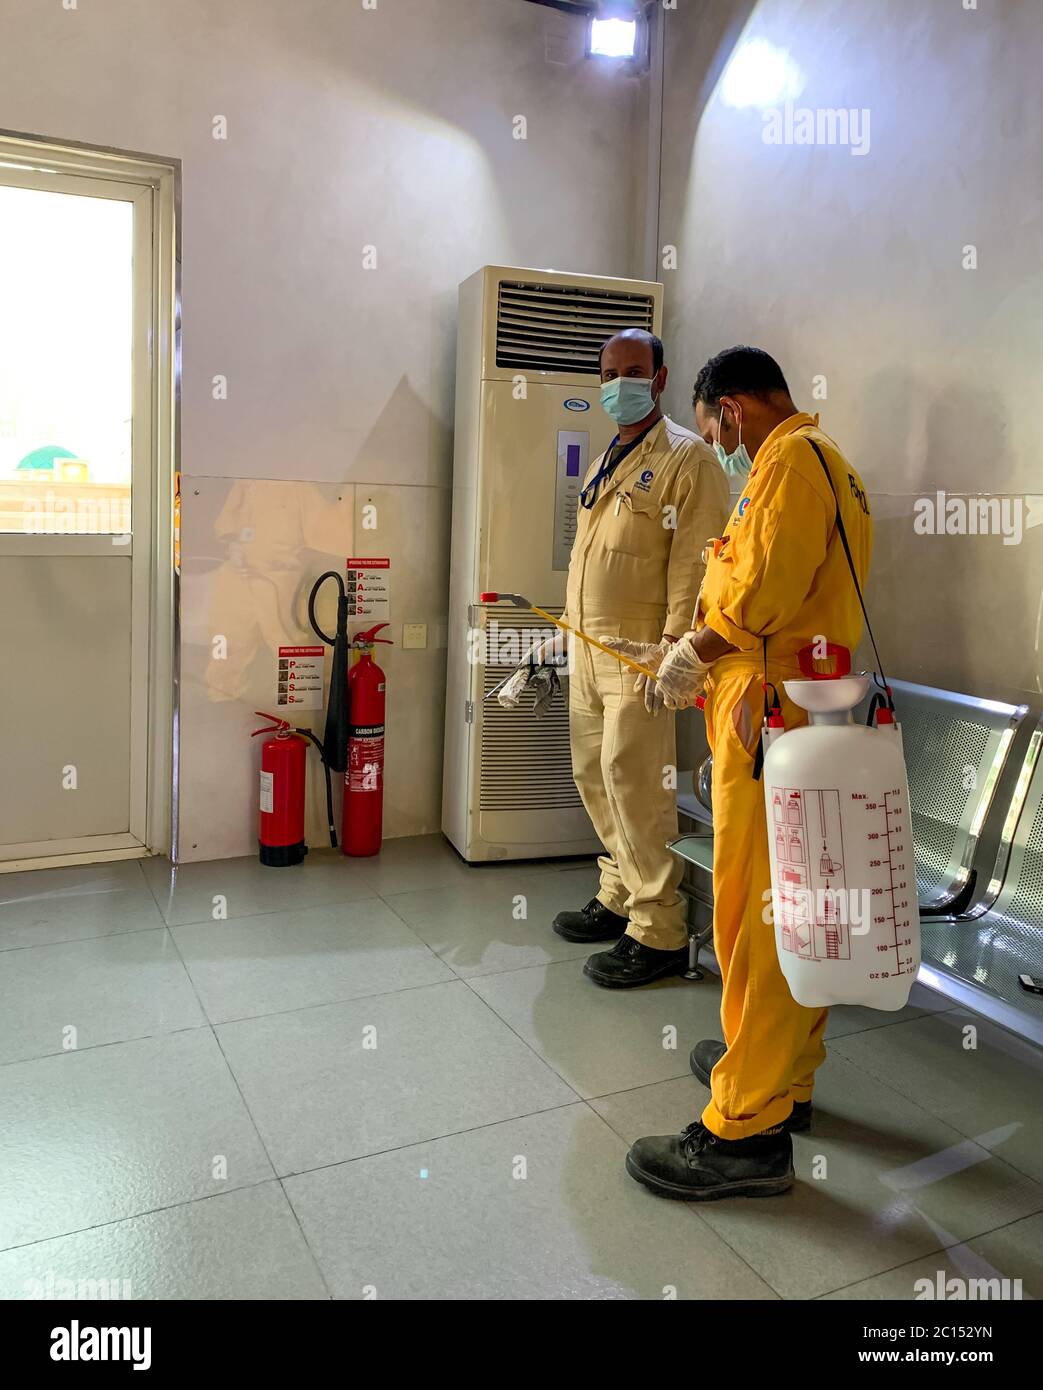 cleaner people in protective hand gloves and face mask, cleaning and disinfect covod-19, coronavirus disease, preventive measures Stock Photo